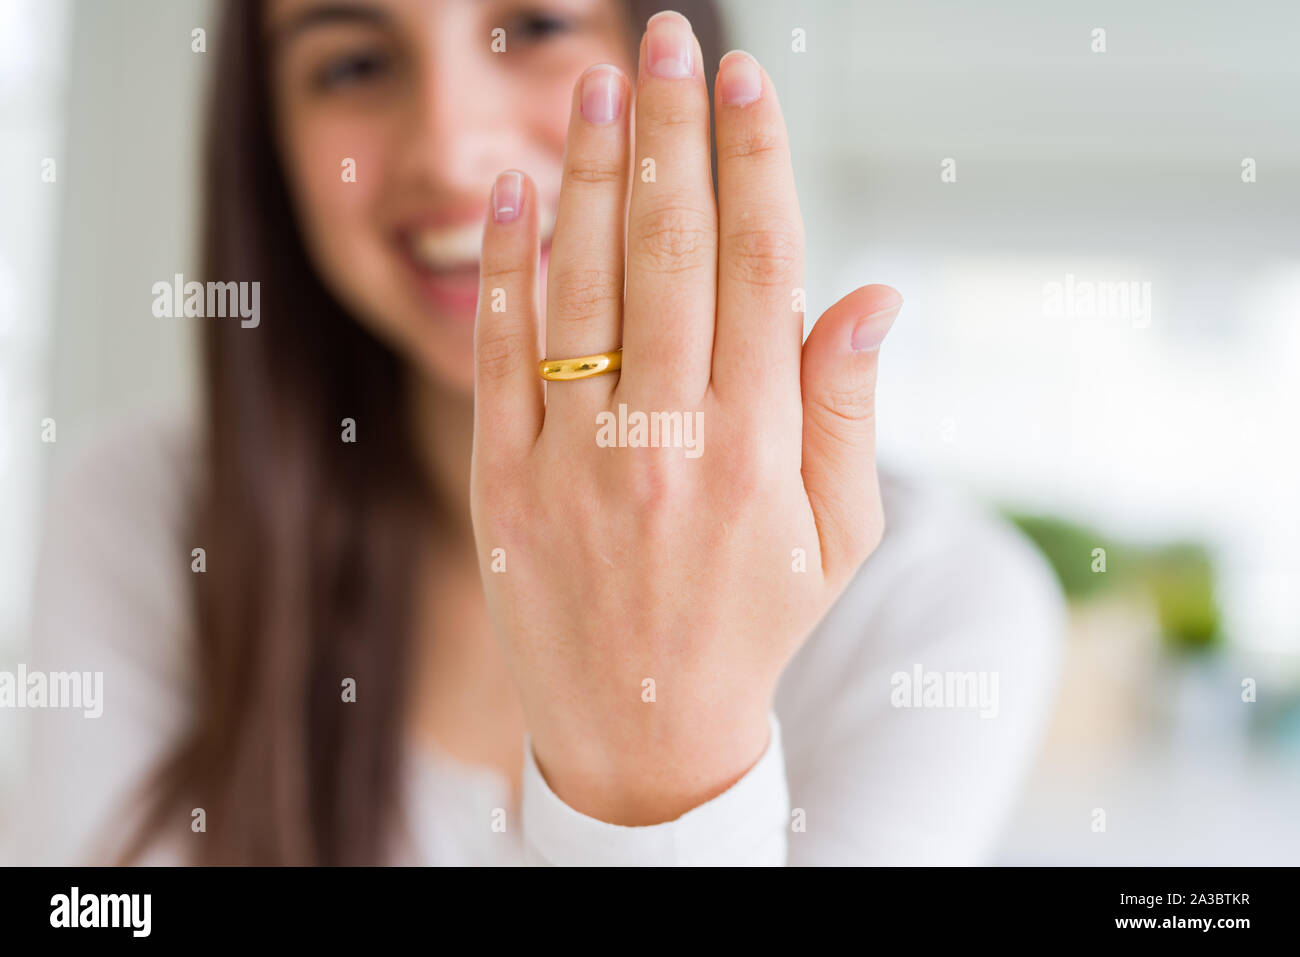 Man & Woman with wedding ring: Hands male and female of newly married  Couple Mar Lodge June 2004 Stock Photo - Alamy